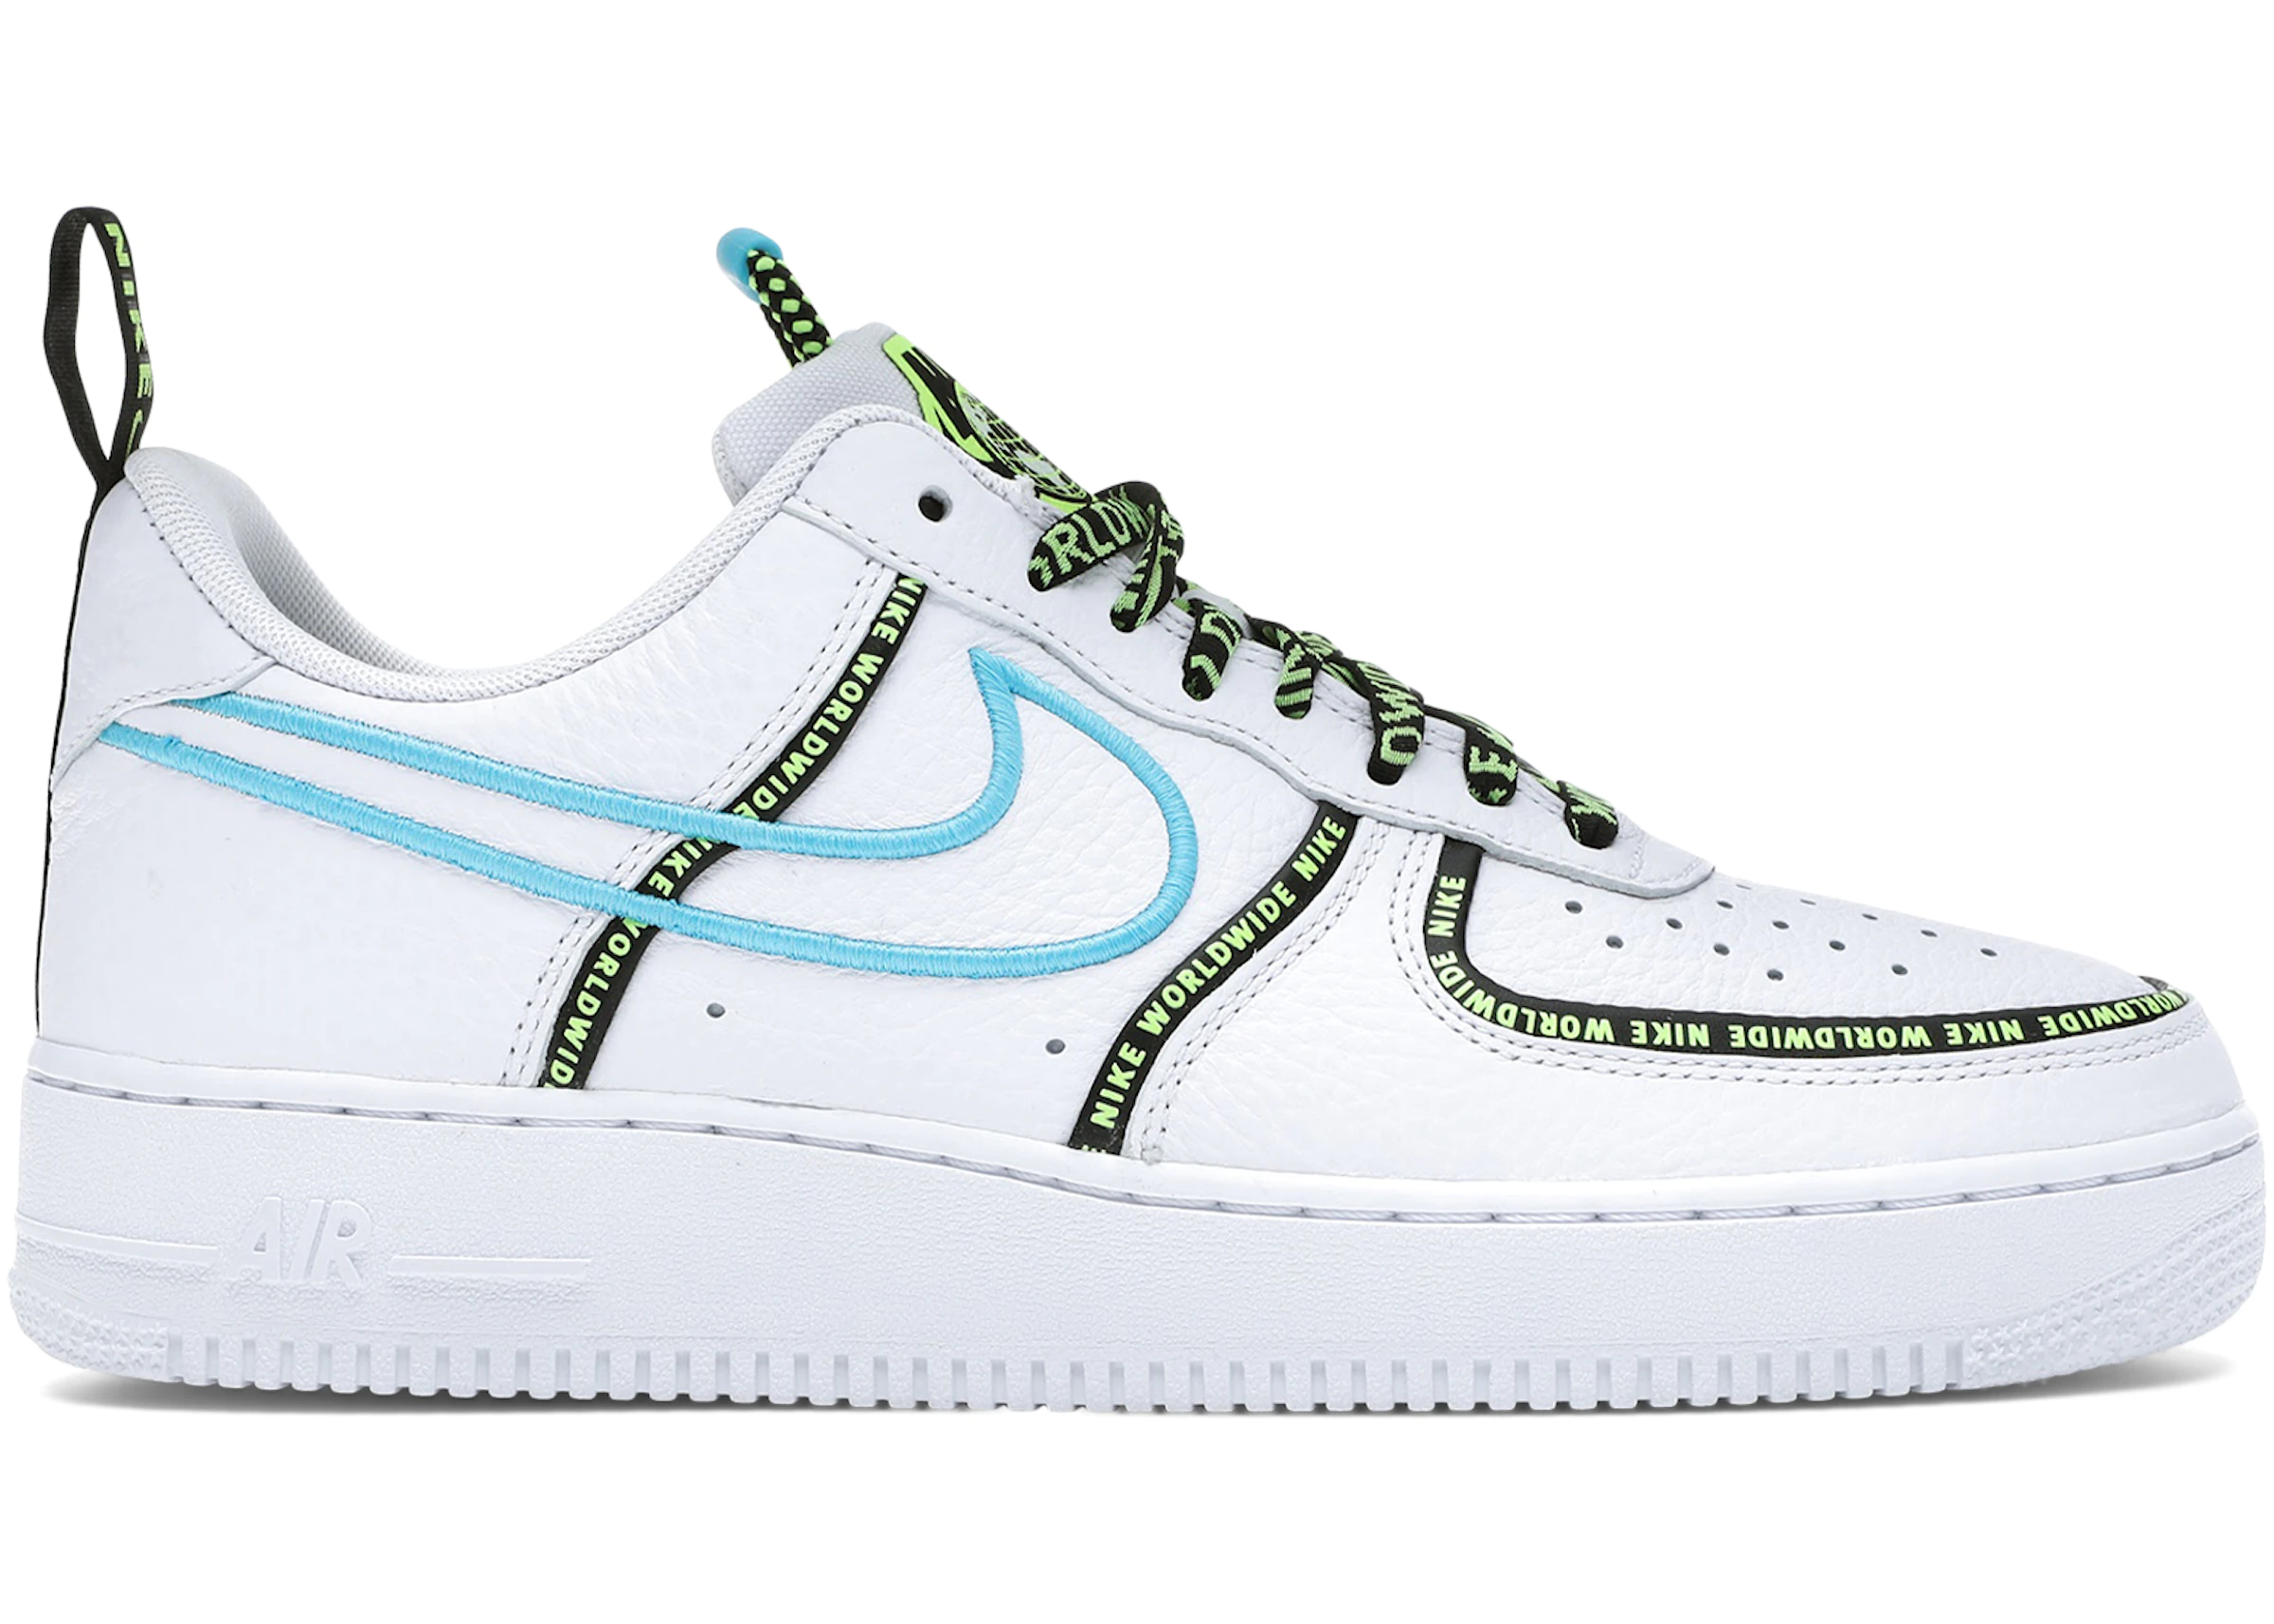 Roman Invoice Newness Nike Air Force 1 Low Worldwide White Blue Fury Volt - CK7213-100 - US